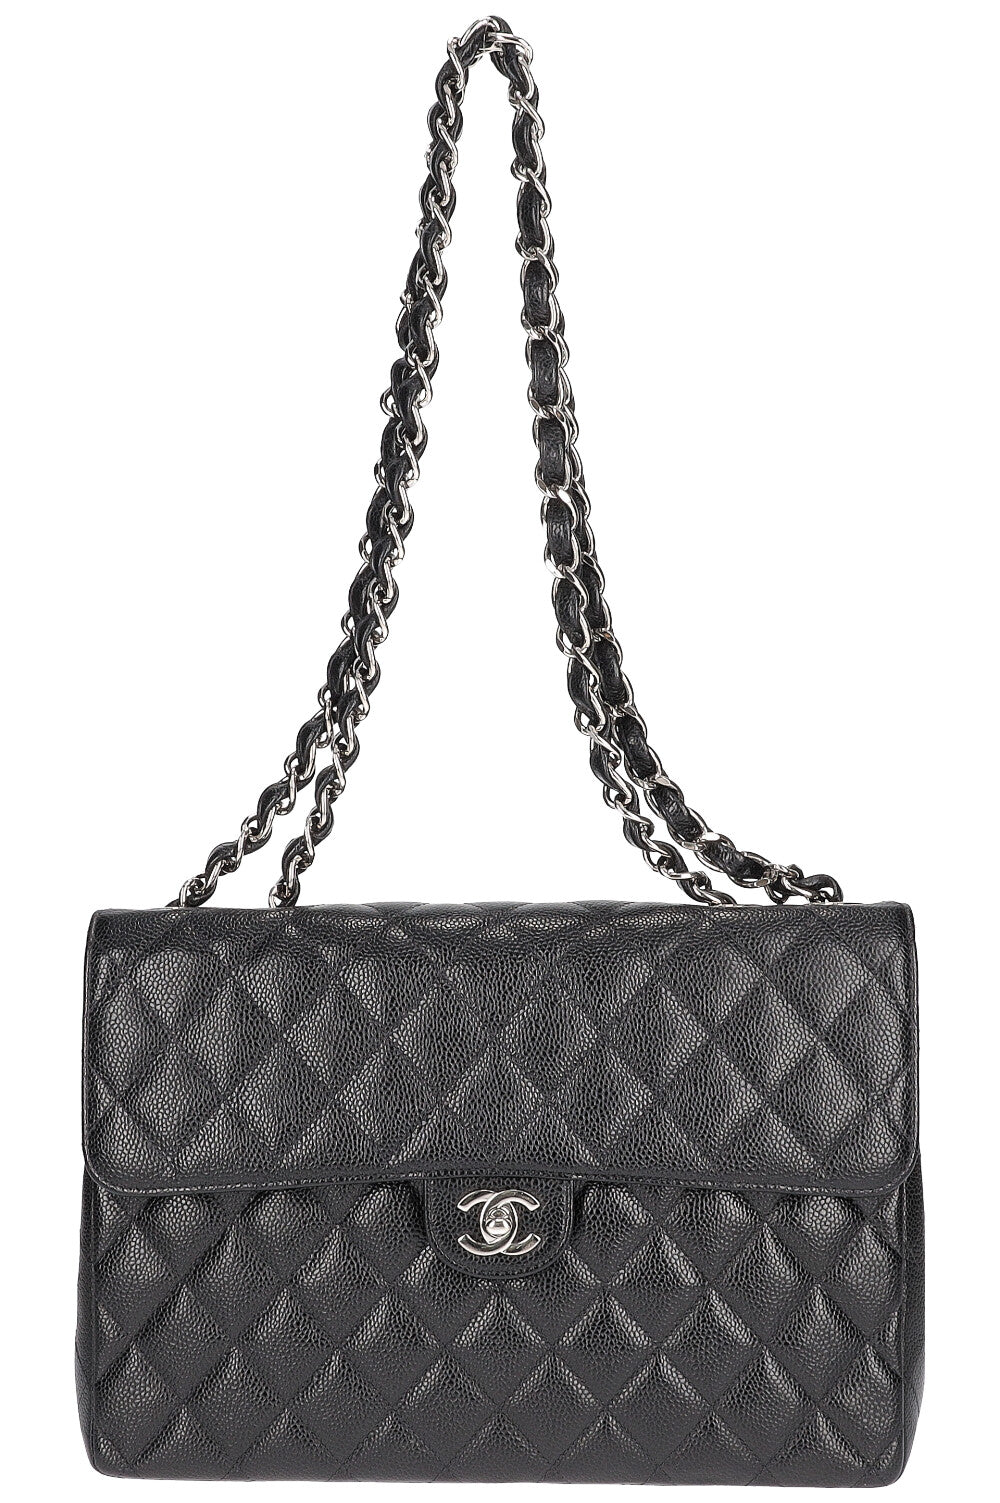 Caviar - CHANEL - Shoulder - Black - A20993 – Quotations from second hand bags  Chanel Soft CC - Chanel Mini Rectangular Flap Bag - Skin - Matelasse - Bag  - Chain